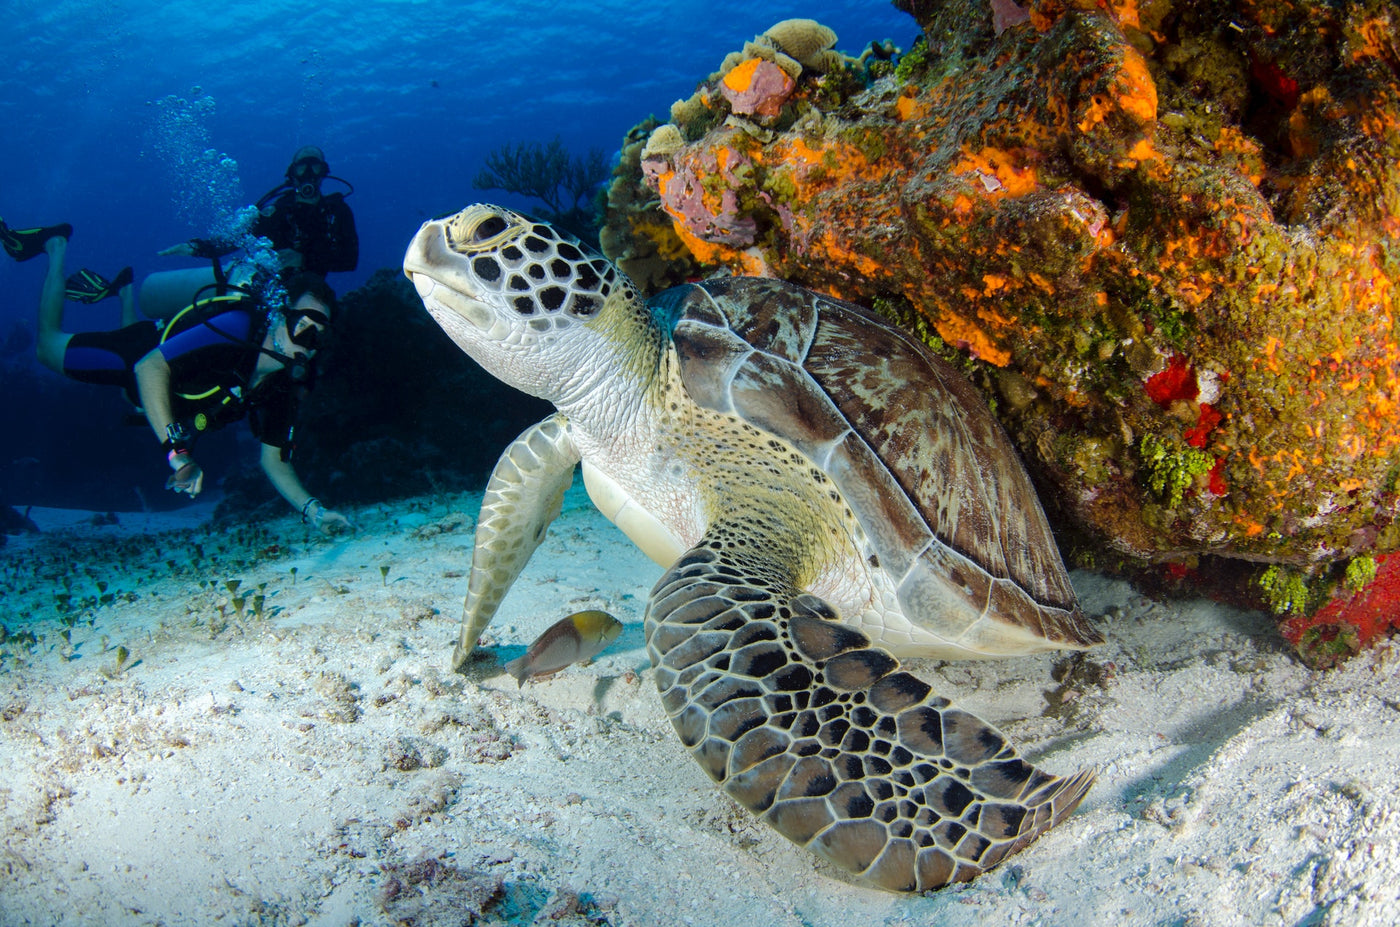 Two scuba divers, diving in the ocean, observing a sea turtle next to a coral reef.